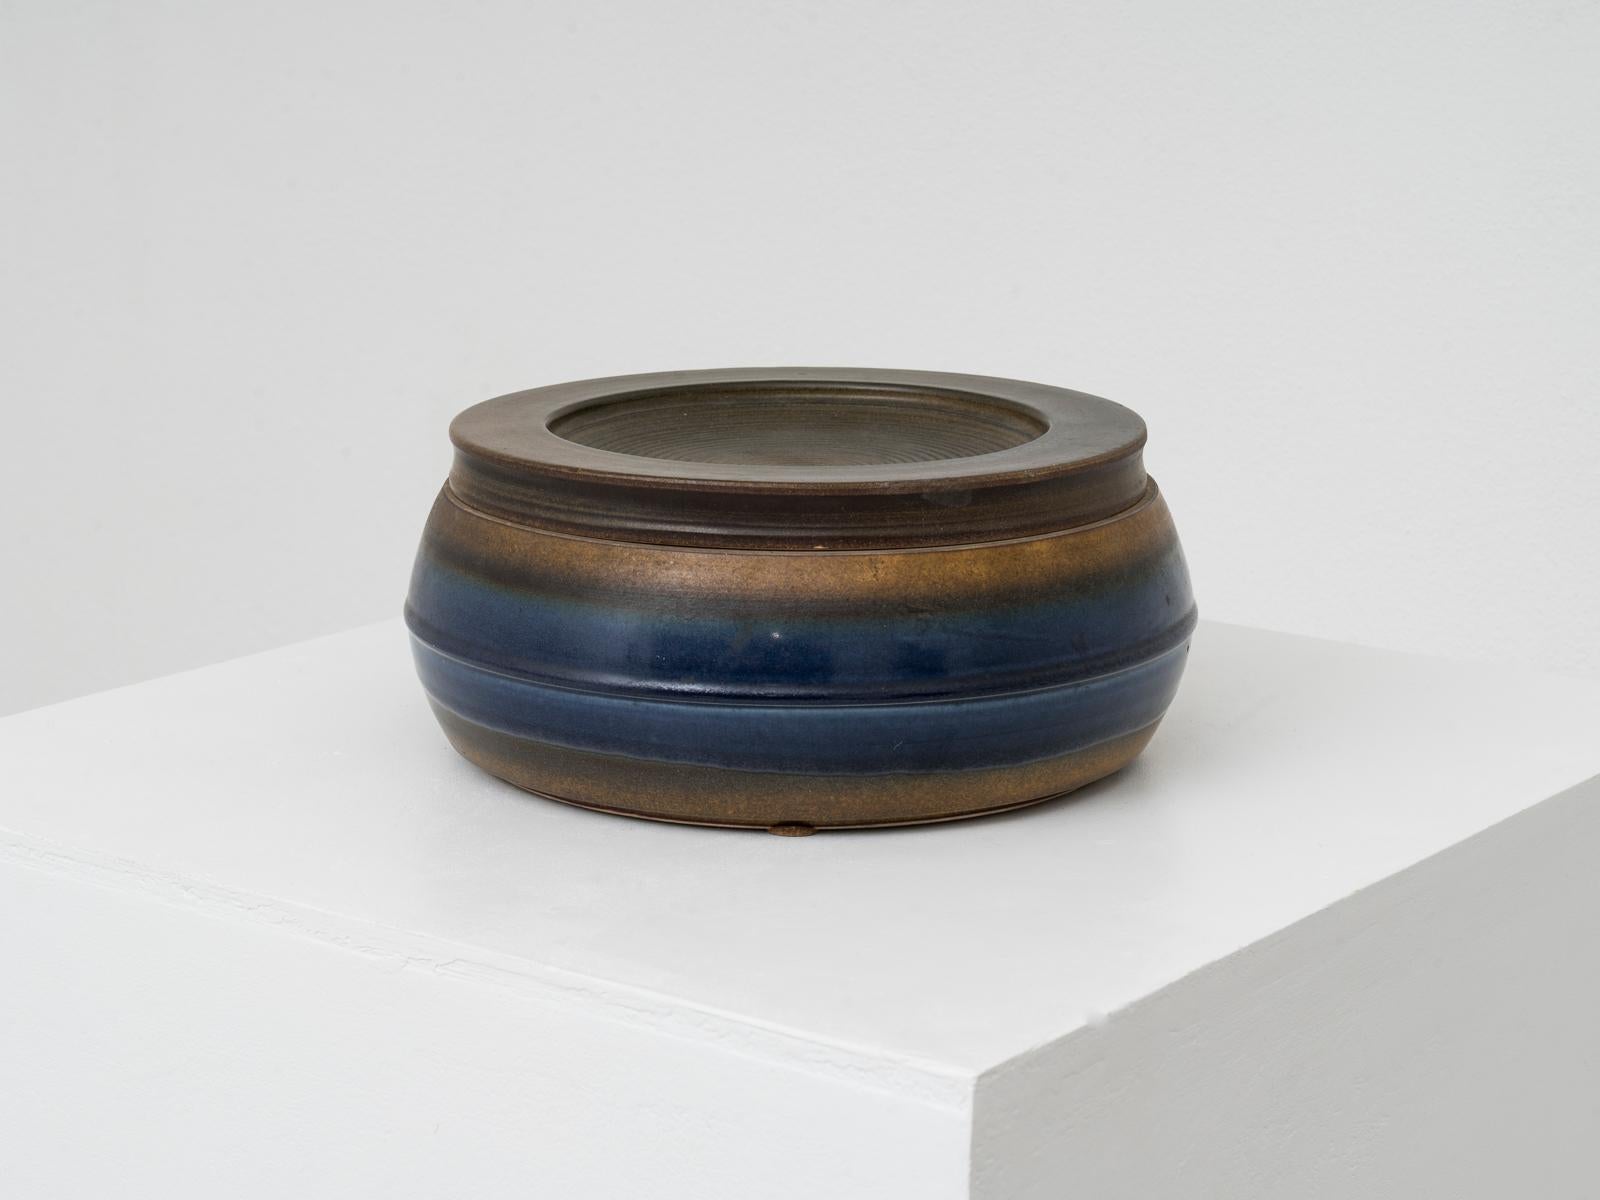 This enameled container was designed by Italian ceramicist Franco Bucci for Laboratorio Pesaro in mid-1960s. It is made of stoneware and it is signed under the base.
Franco Bucci was one of the most important Italian ceramicists of the late 20th